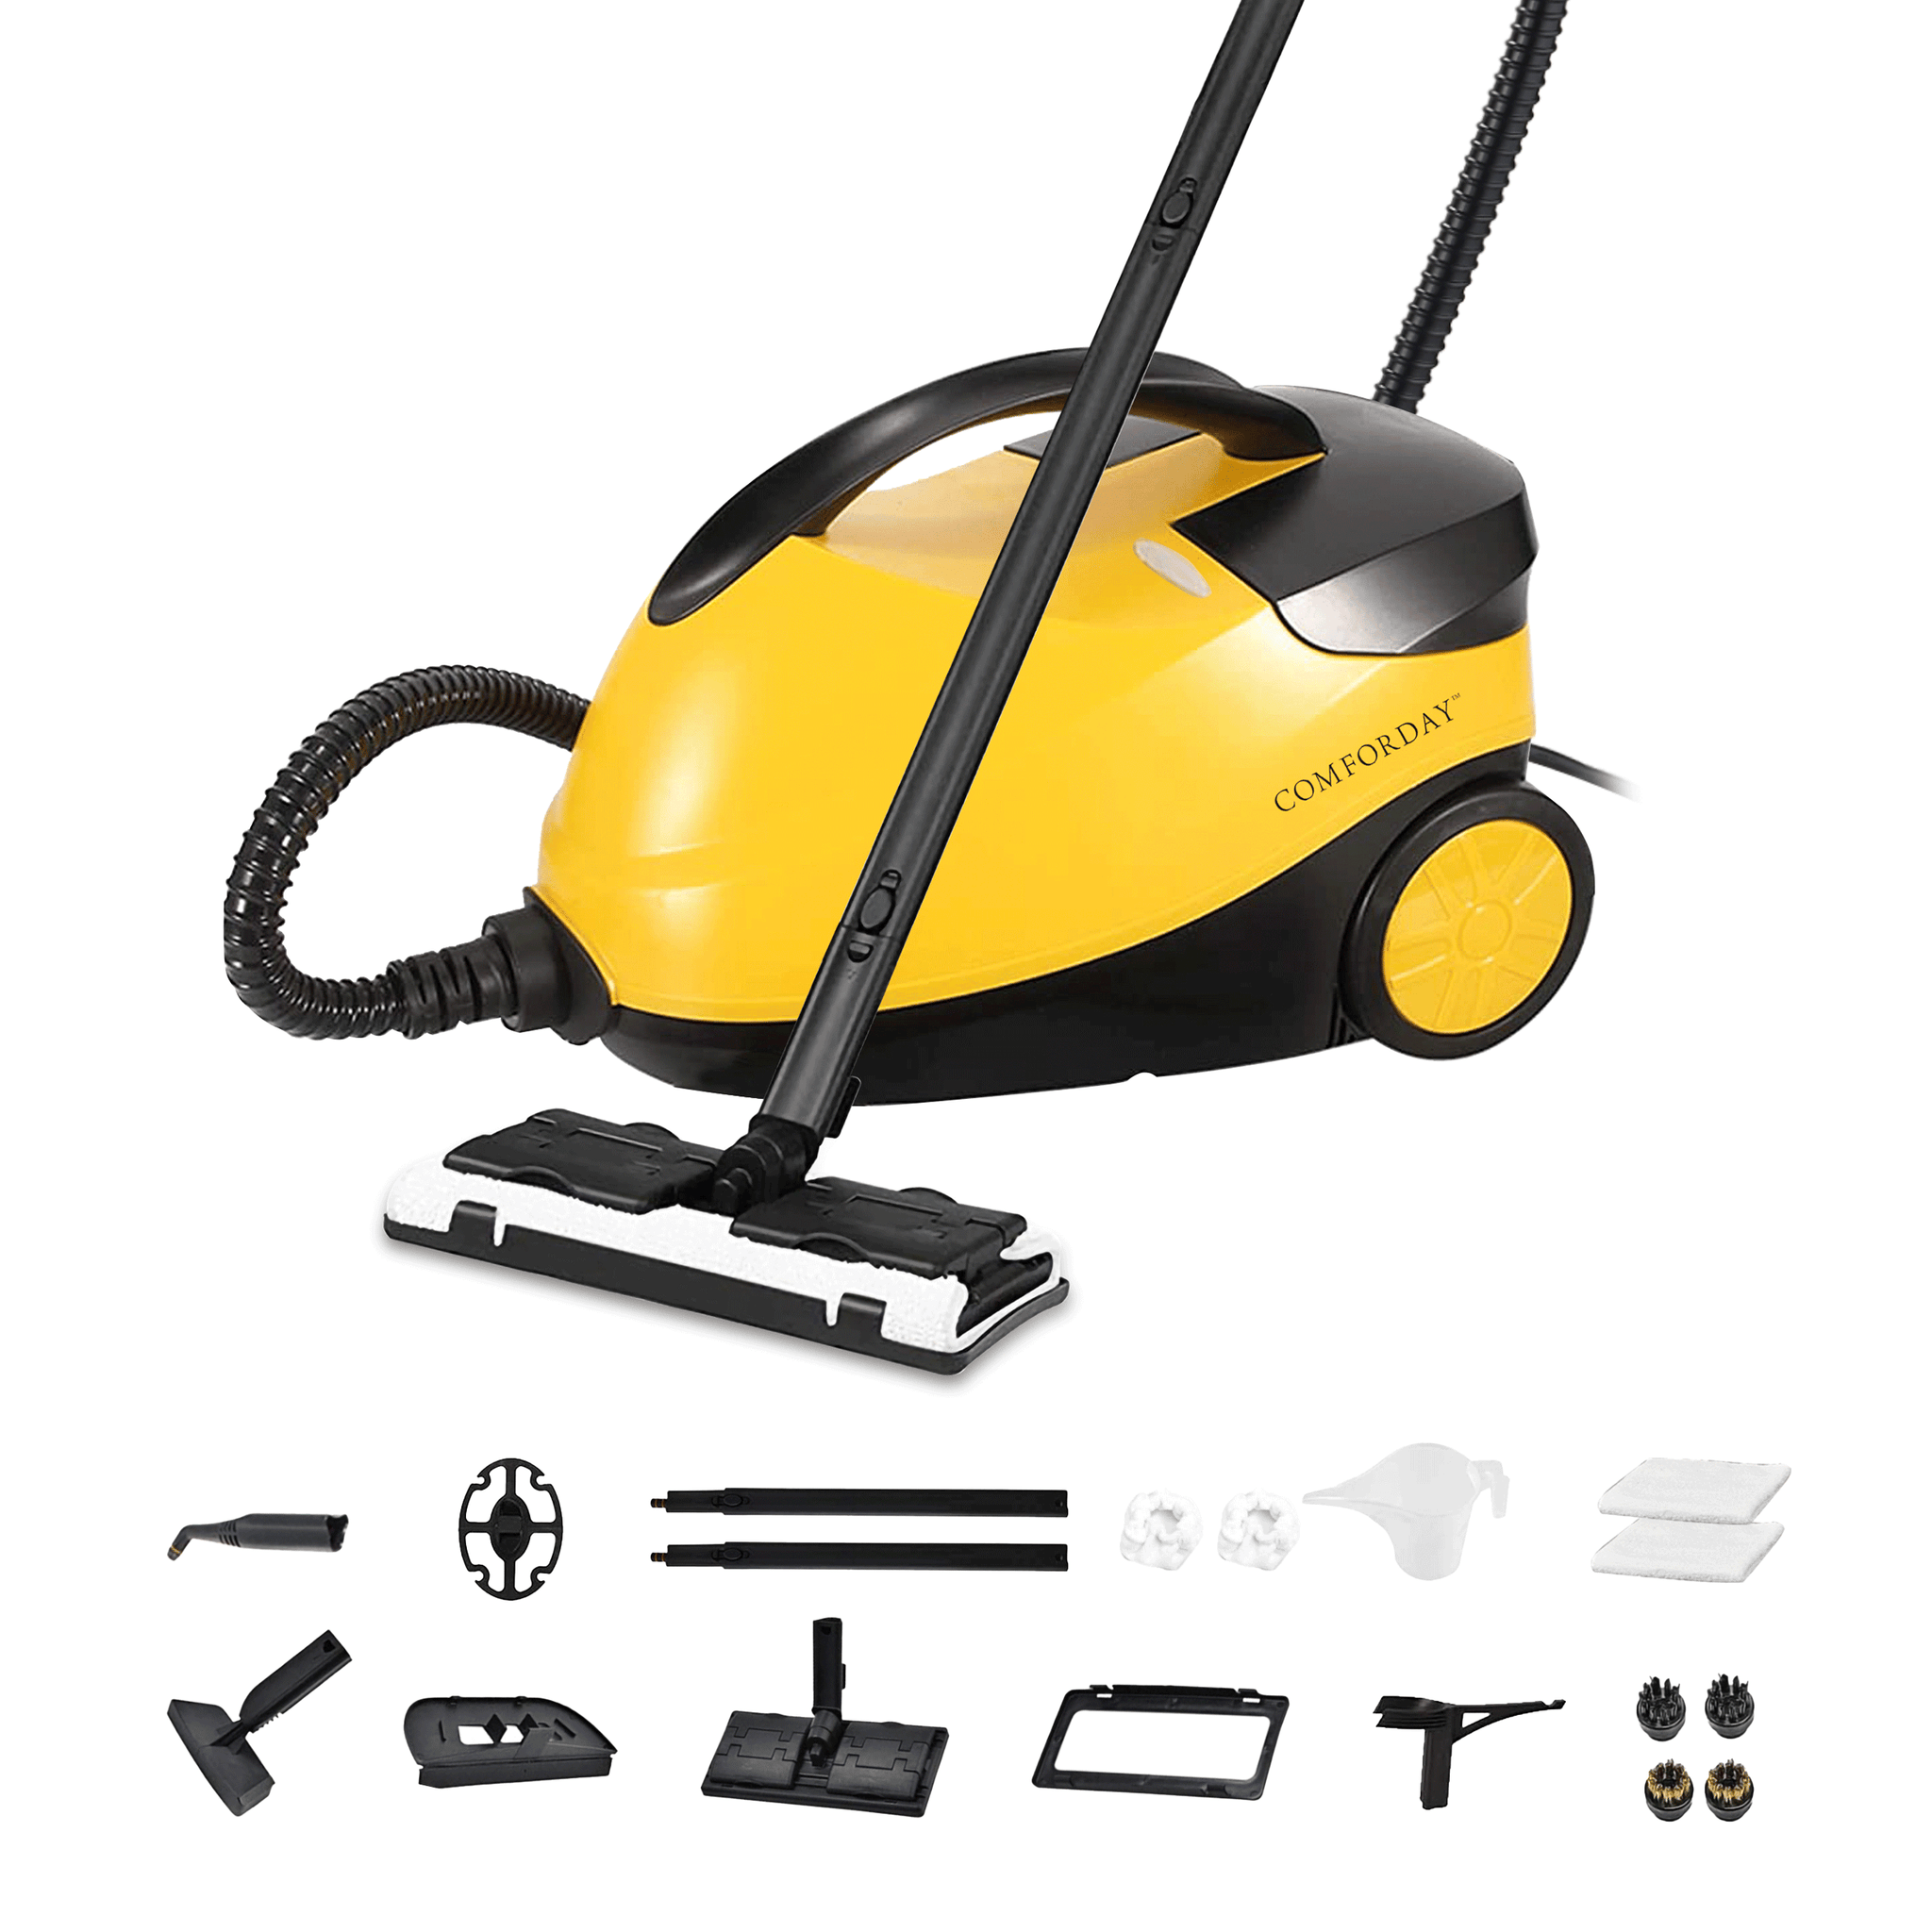 1500W Multipurpose Steam Cleaner with 17 Piece Accessories is coming soon